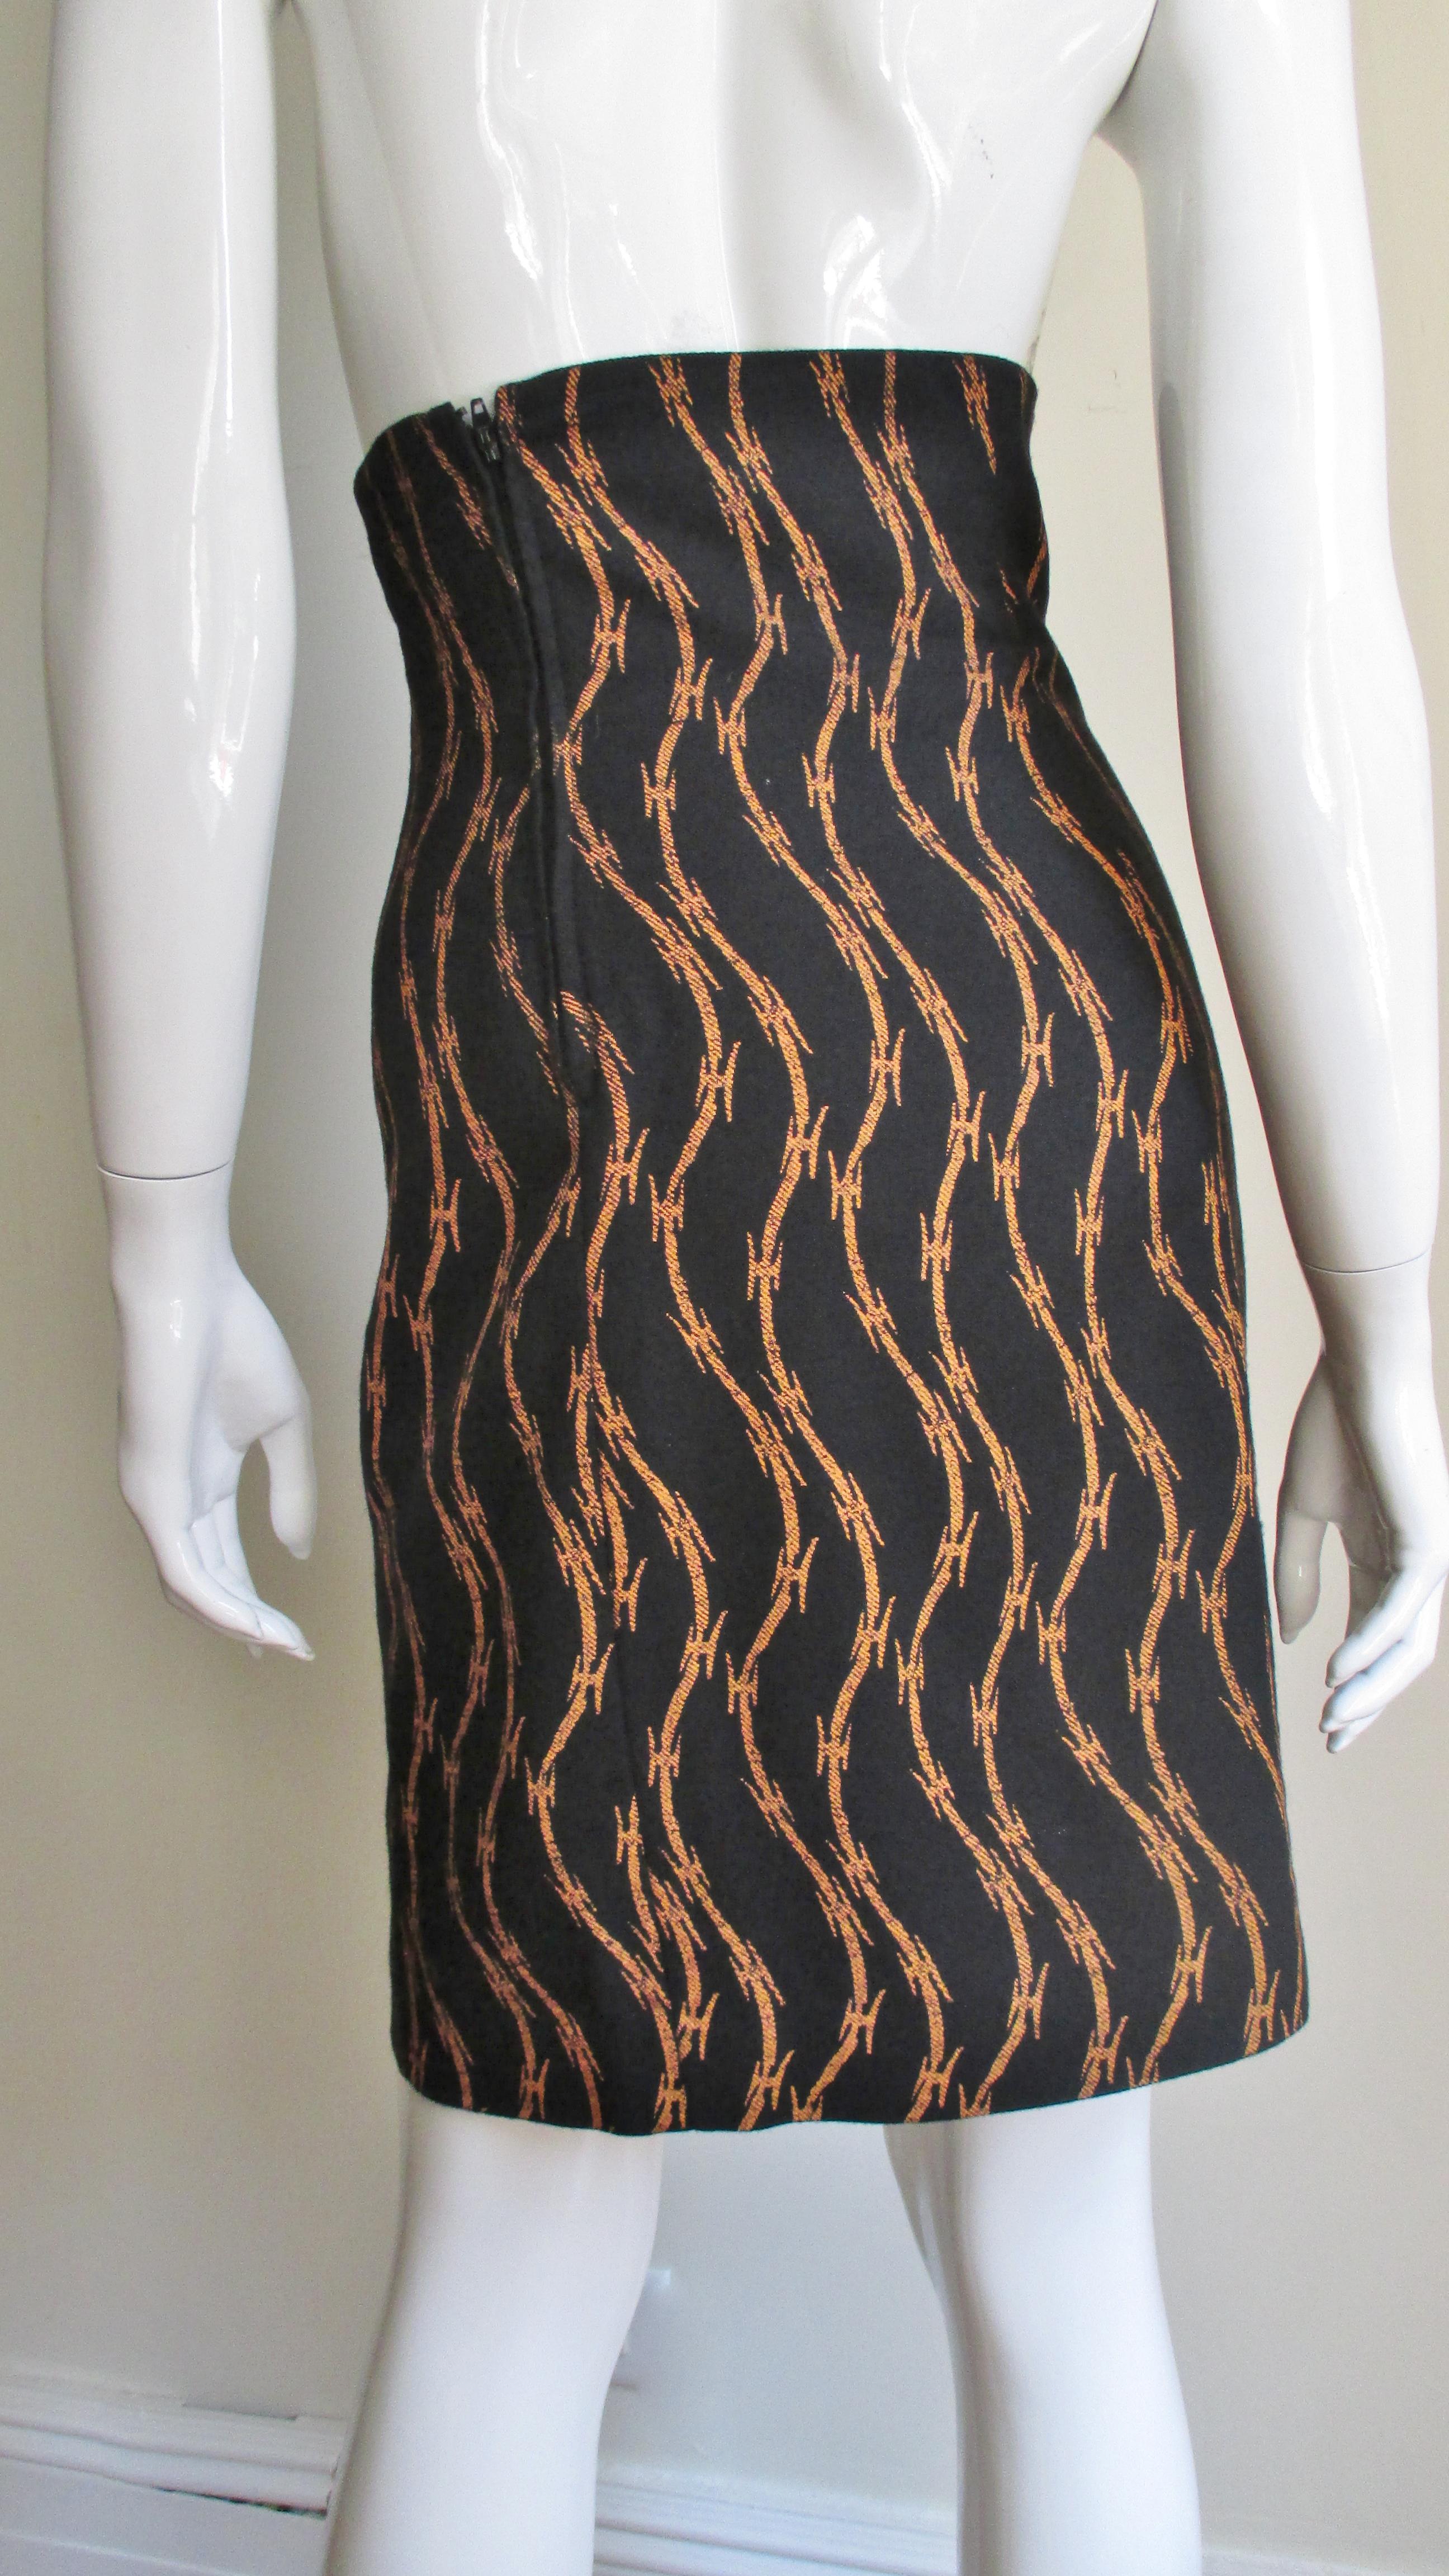 Women's Stephen Sprouse Iconic Barb Wire Print Skirt 1980s For Sale